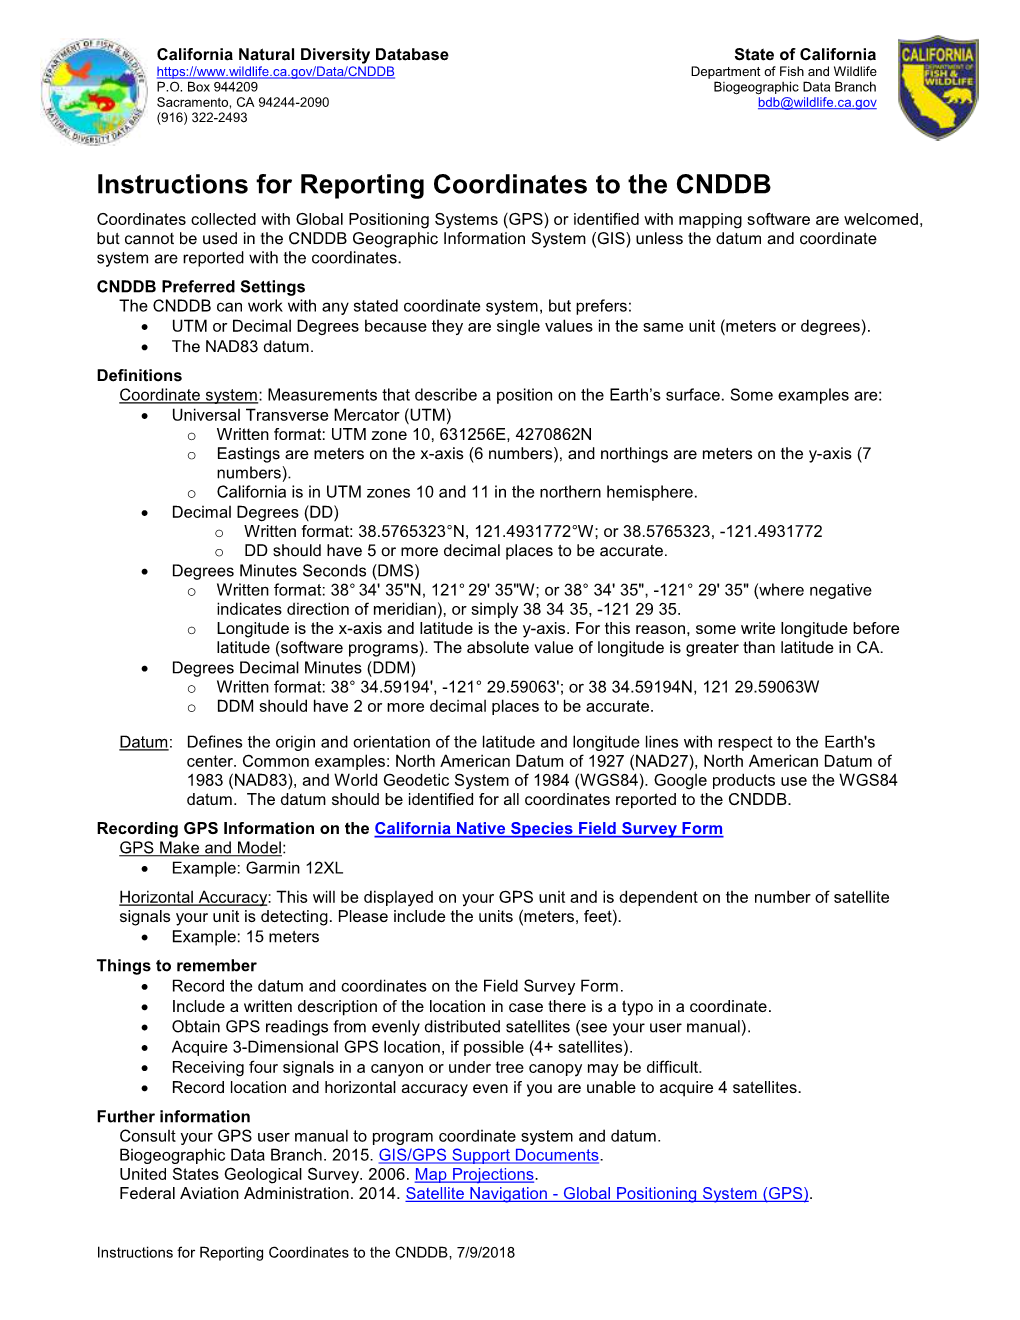 Instructions for Reporting Coordinates to the CNDDB